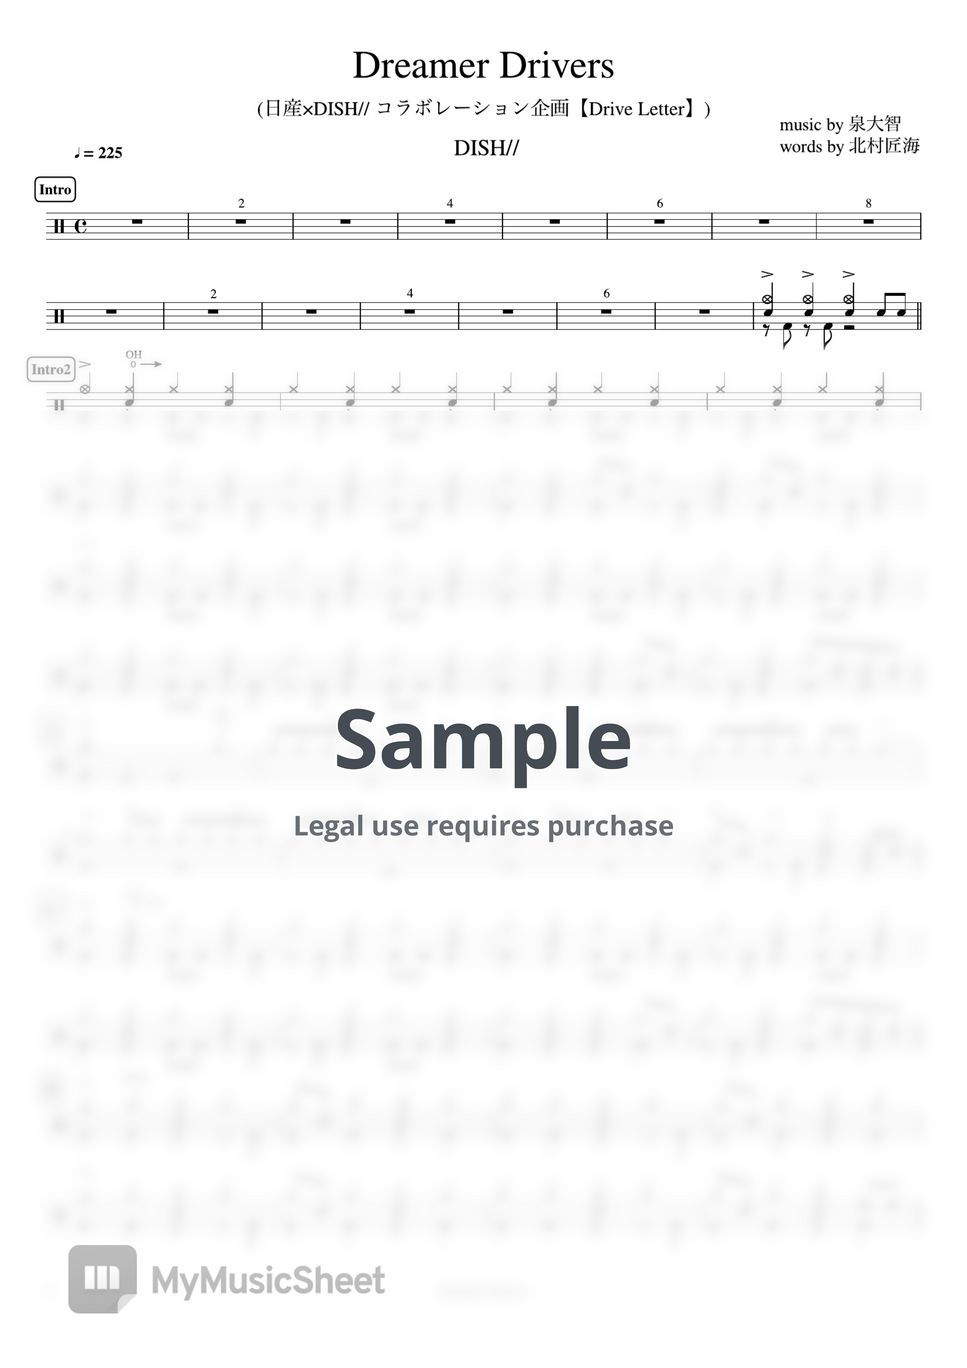 DISH// - Dreamer Drivers (日産×DISH// コラボレーション企画【Drive Letter】) by Cookai's J-pop Drum sheet music!!!